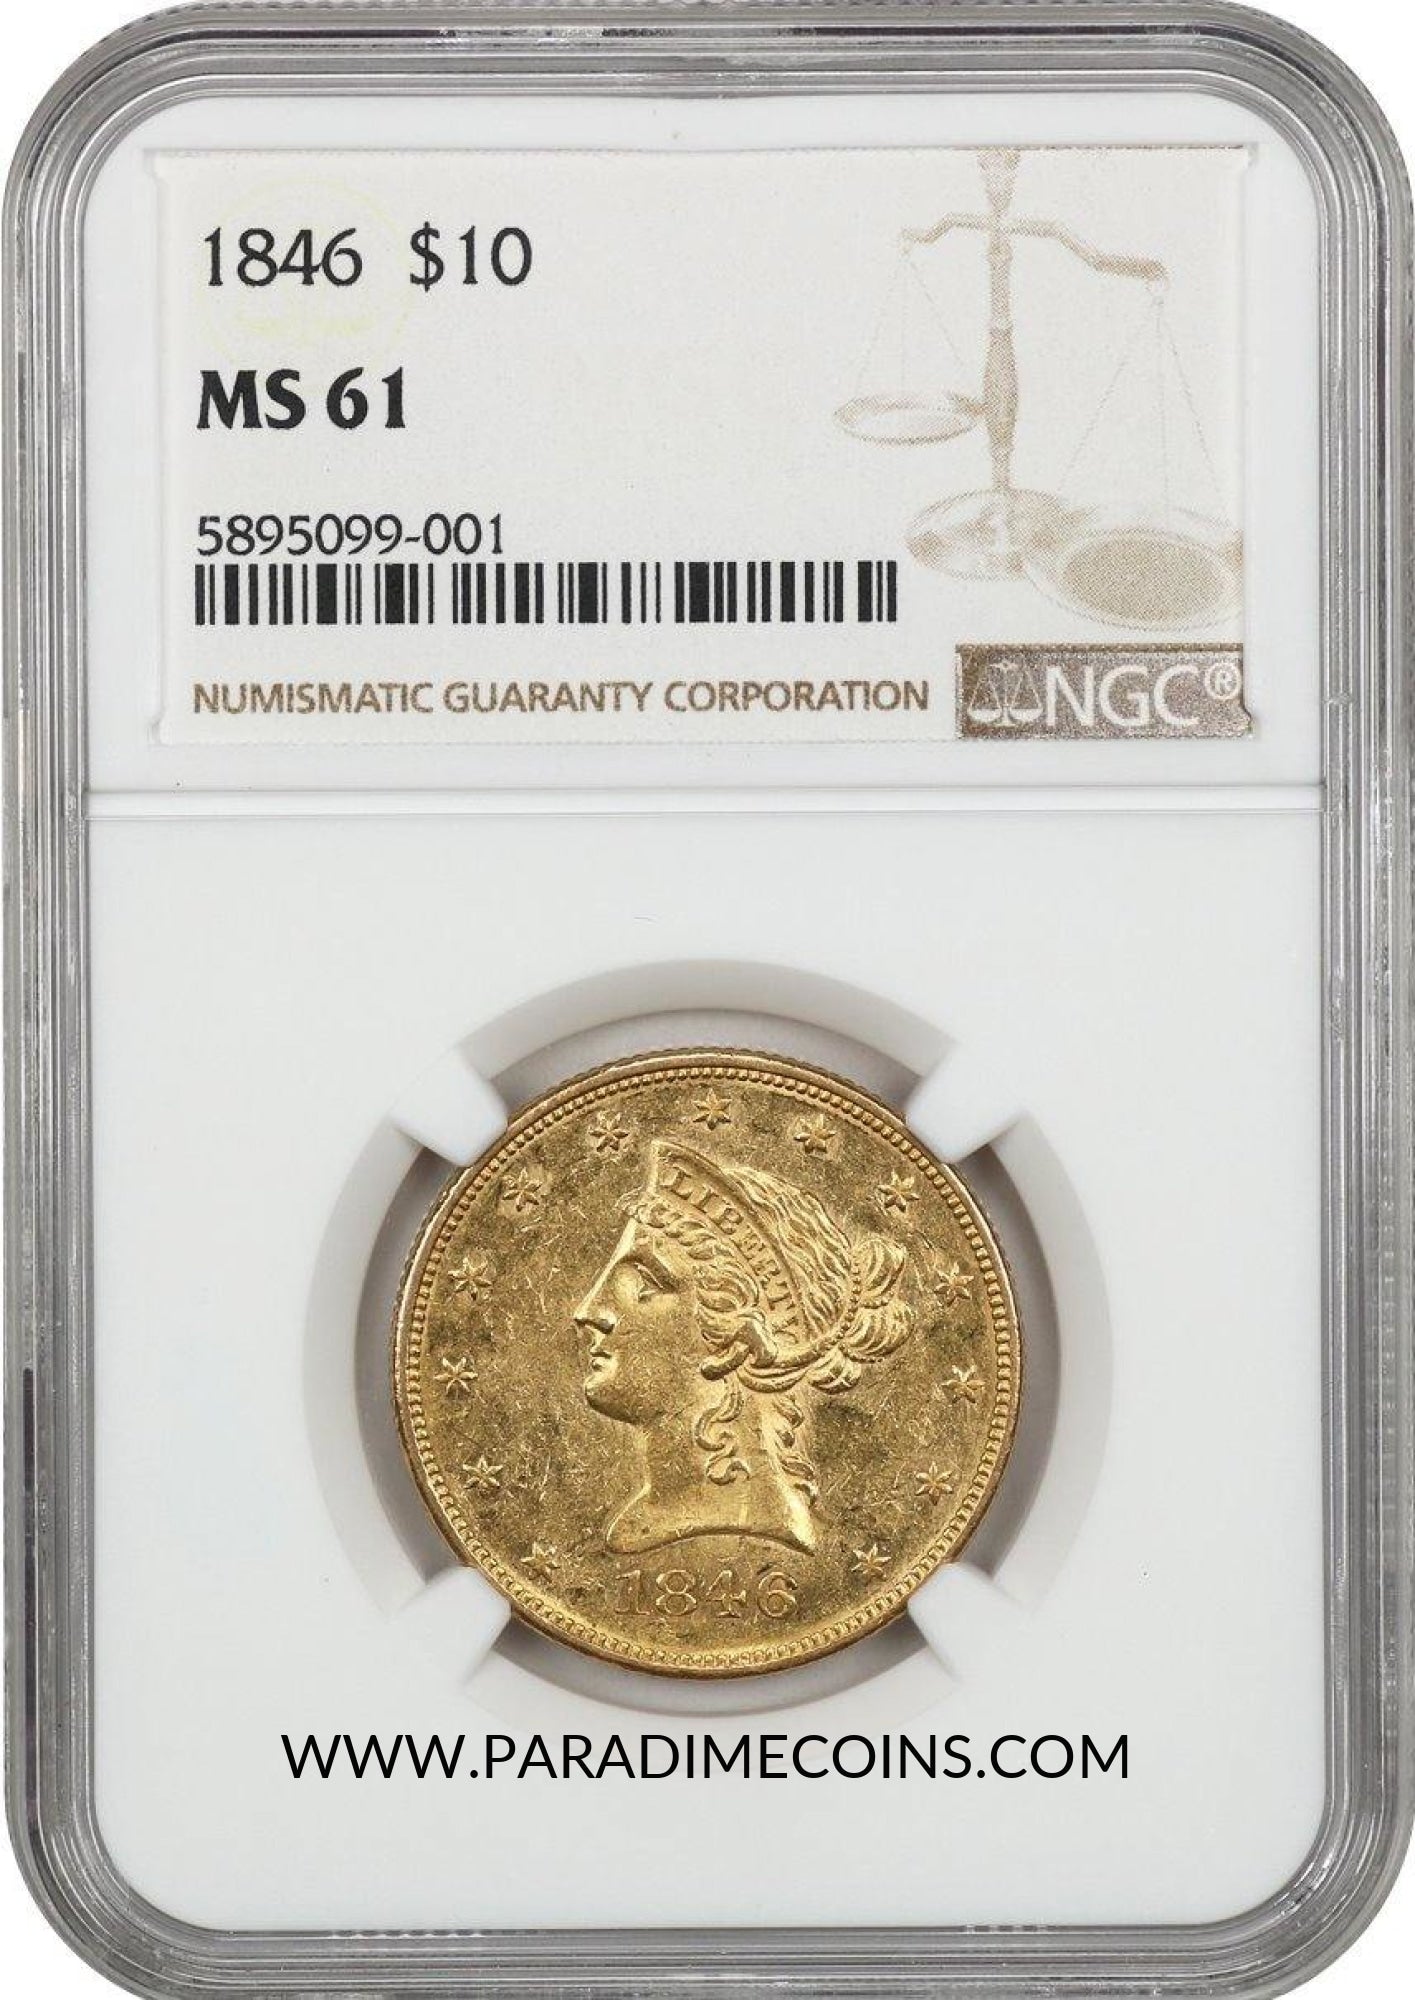 1846 $10 MS61 NGC - Paradime Coins | PCGS NGC CACG CAC Rare US Numismatic Coins For Sale